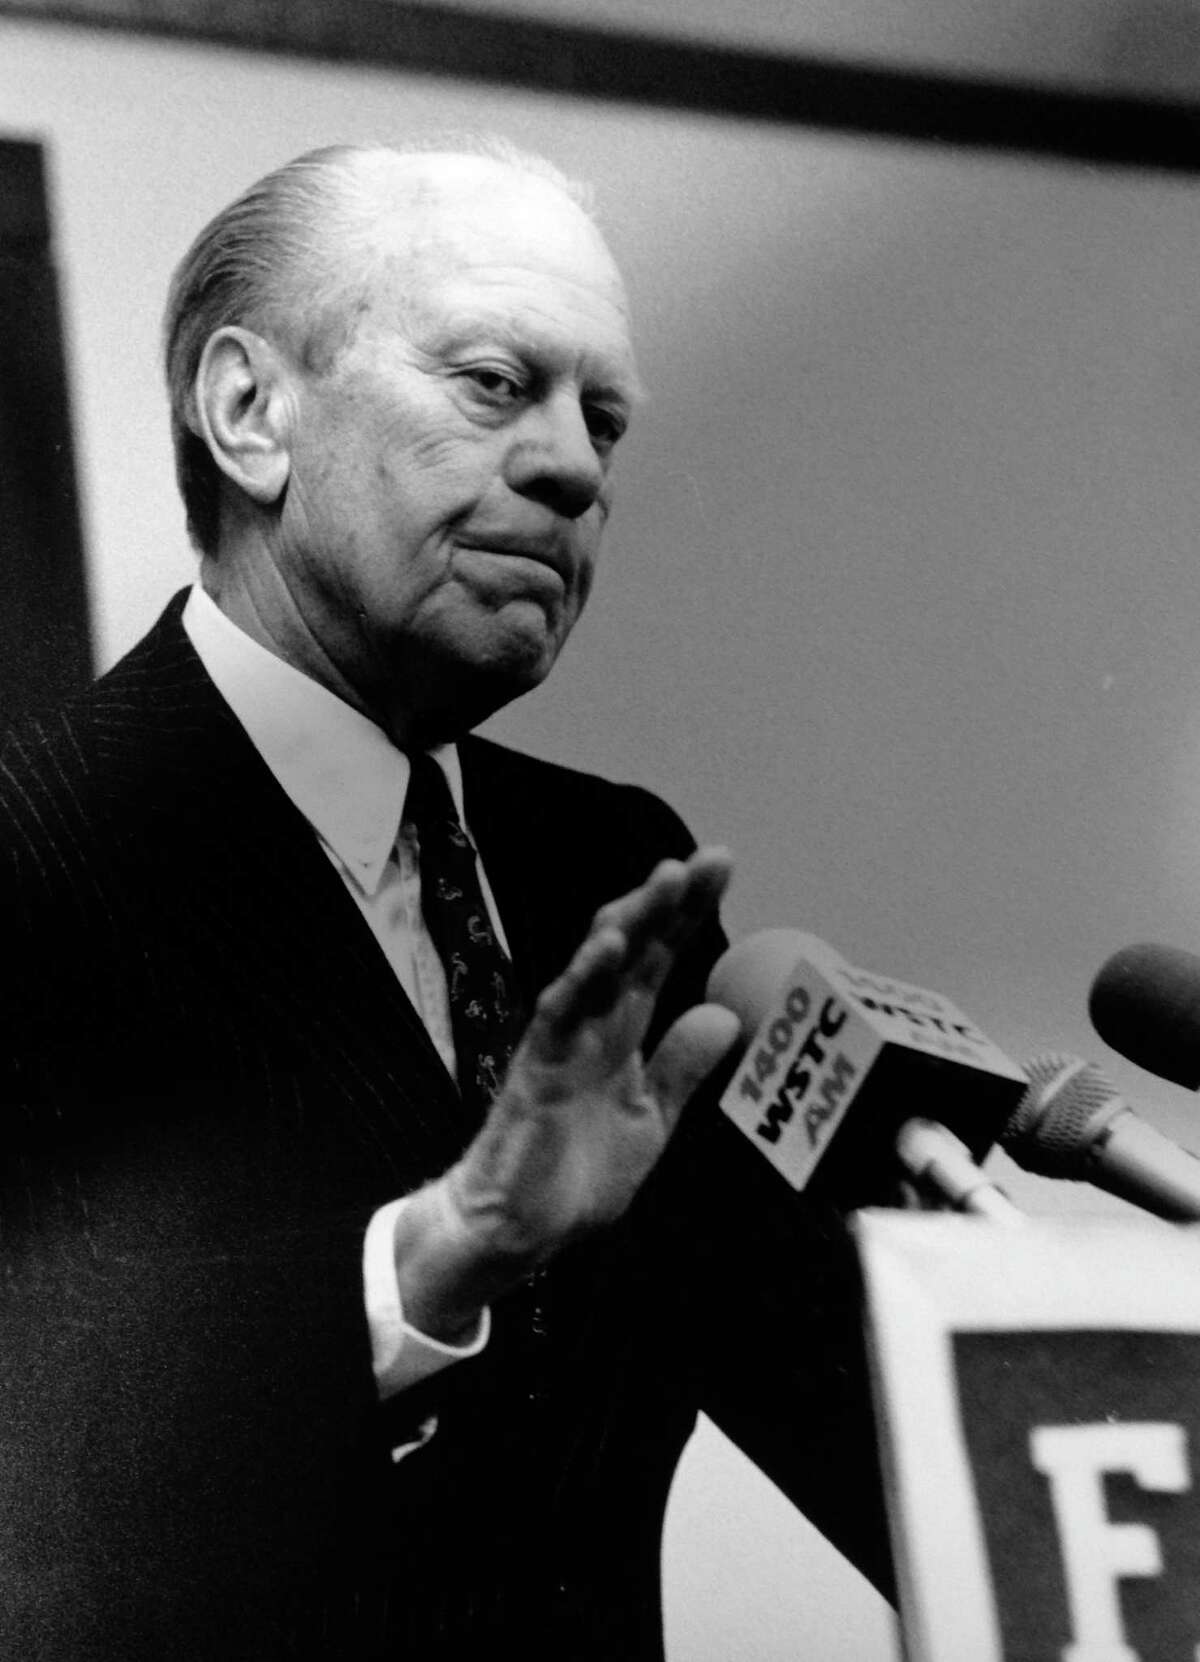 Former President Gerald Ford speaks at the Fairfield awards dinner to raise money for minority scholarships on Dec. 1, 1989 at the Stamford Sheraton hotel.